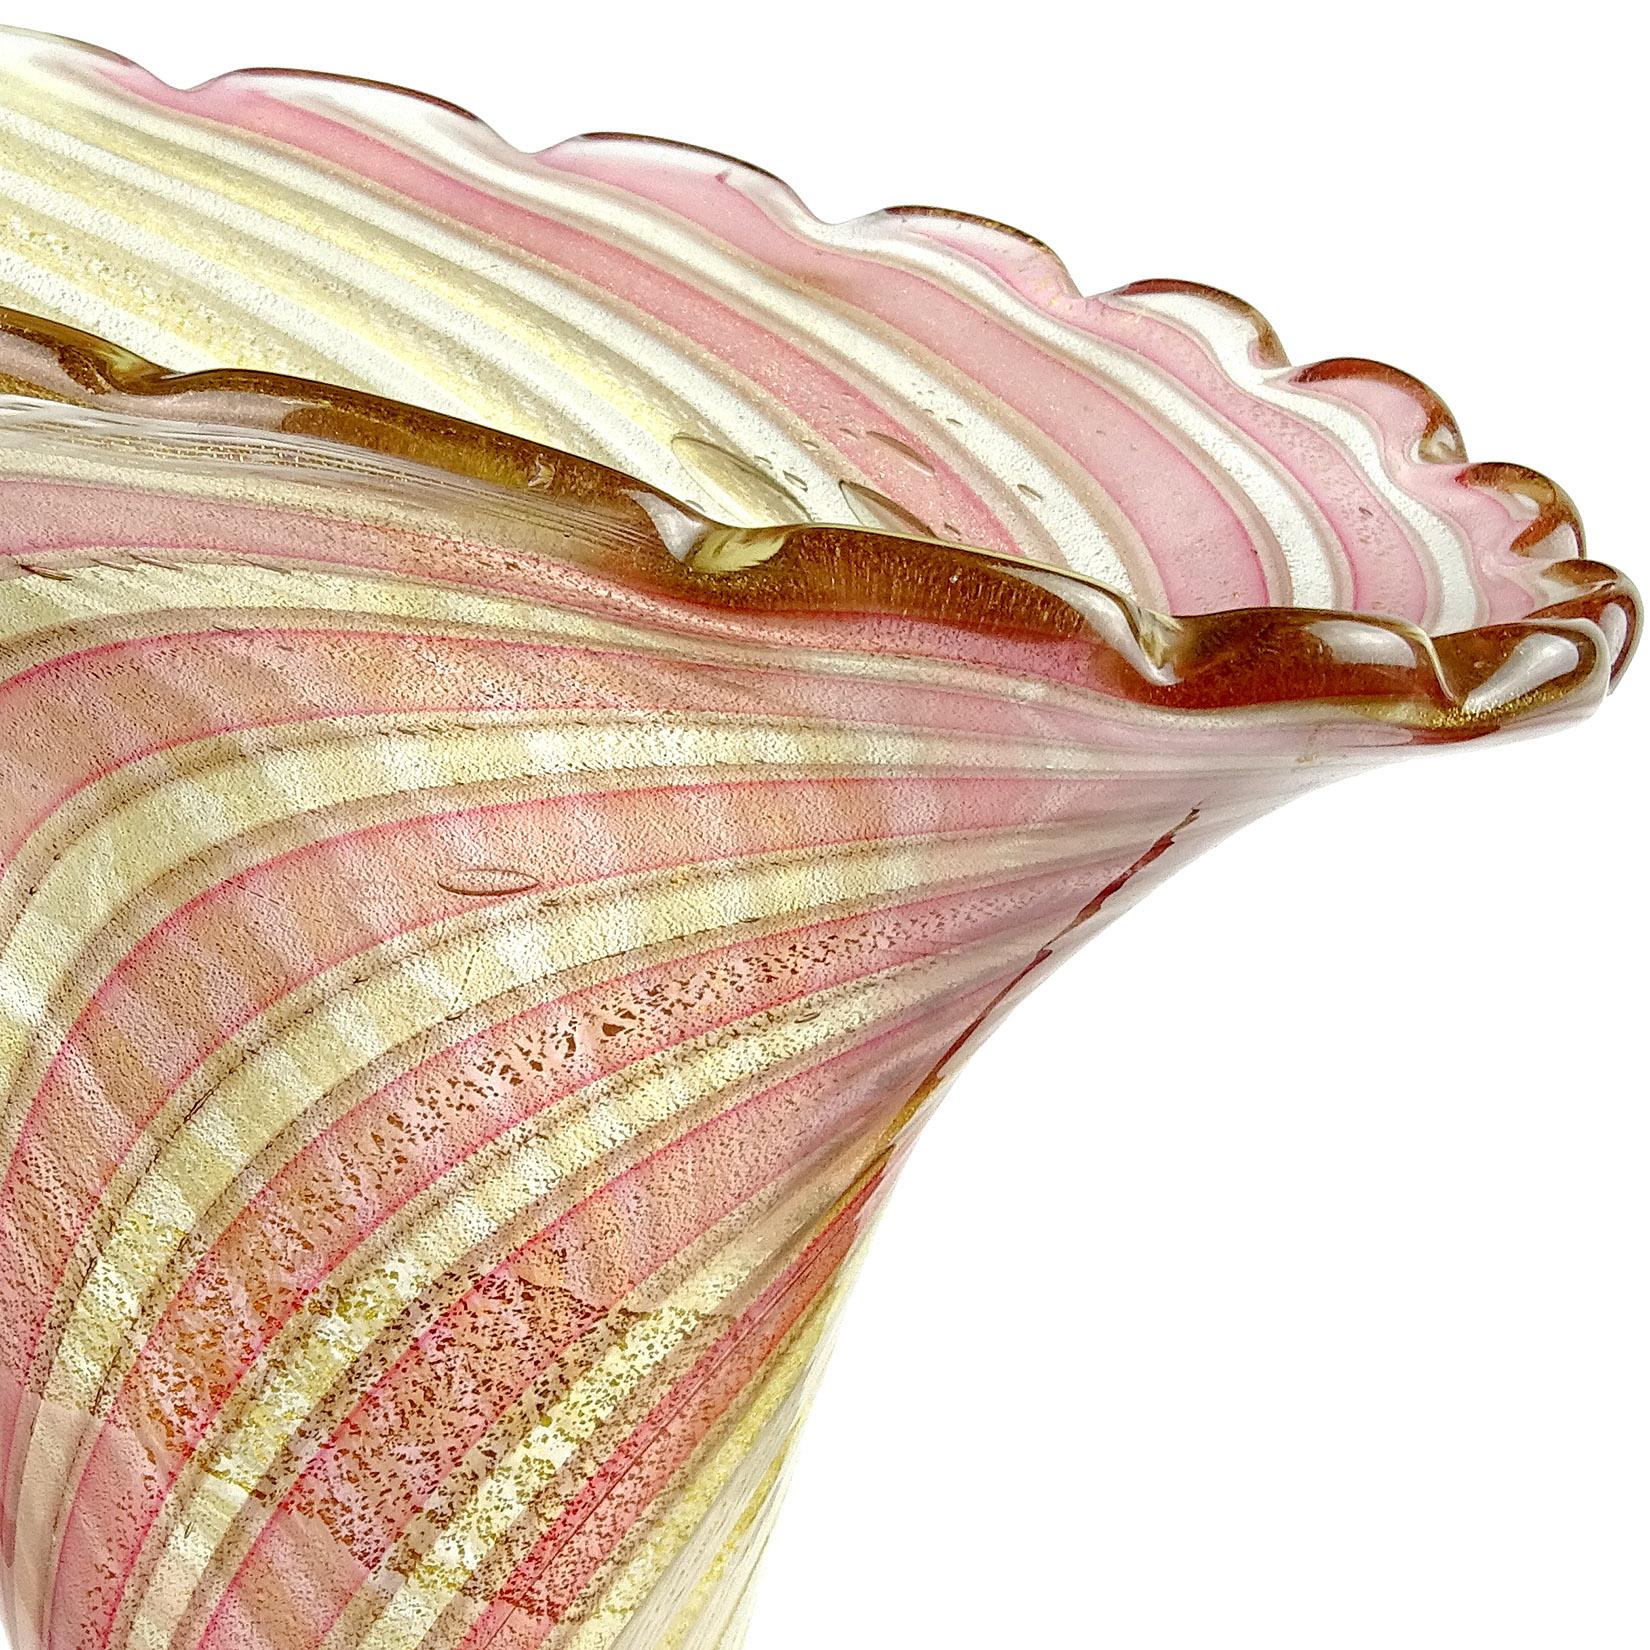 Gorgeous Murano hand blown Zanfirico ribbons and gold flecks Italian art glass sculptural flower vase. Documented to designer Dino Martens for Aureliano Toso, circa 1954, model number 5669 (published, see last photo). The piece has white net